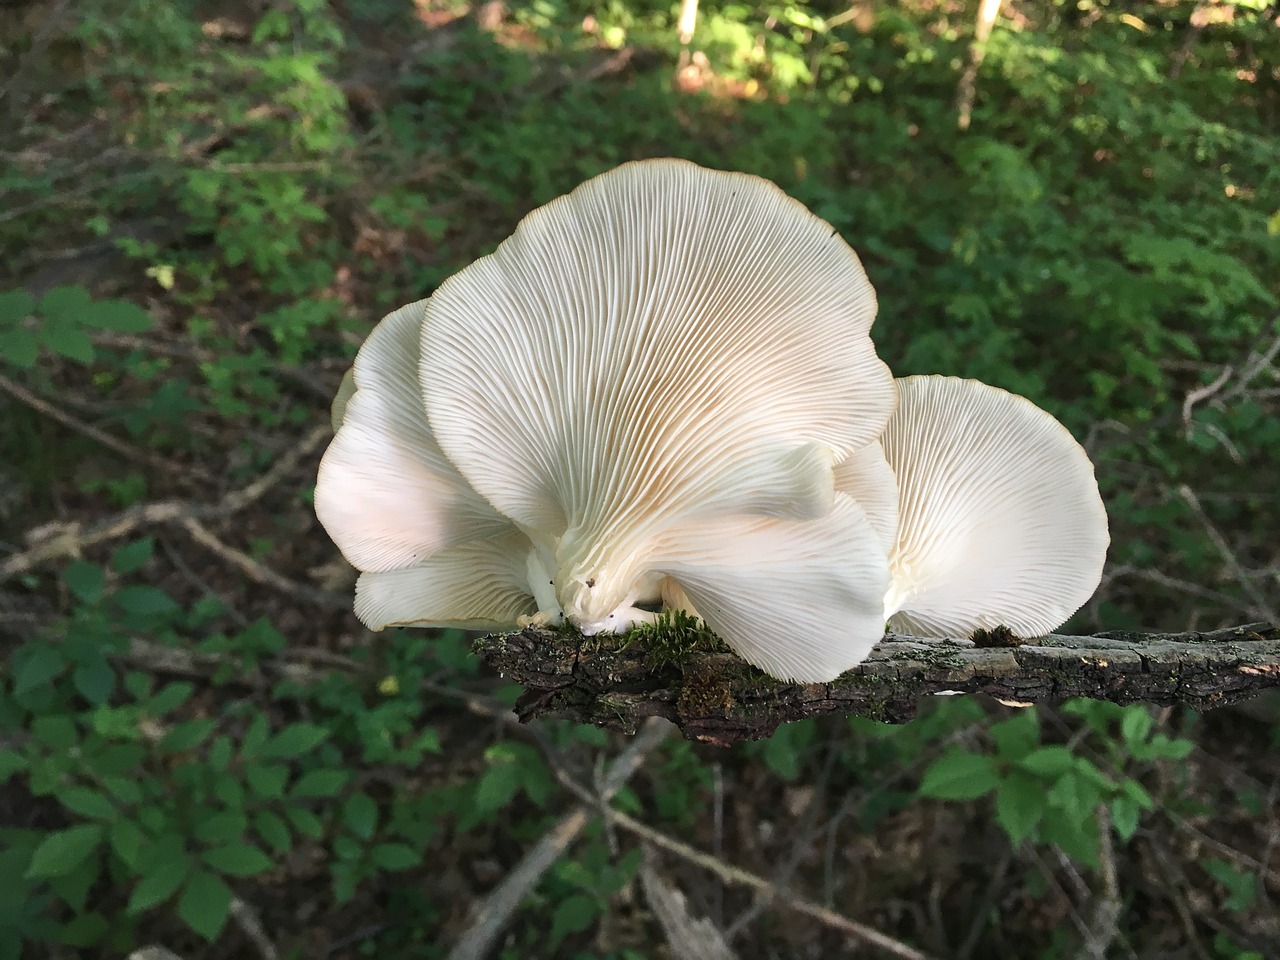 What are oyster mushrooms?